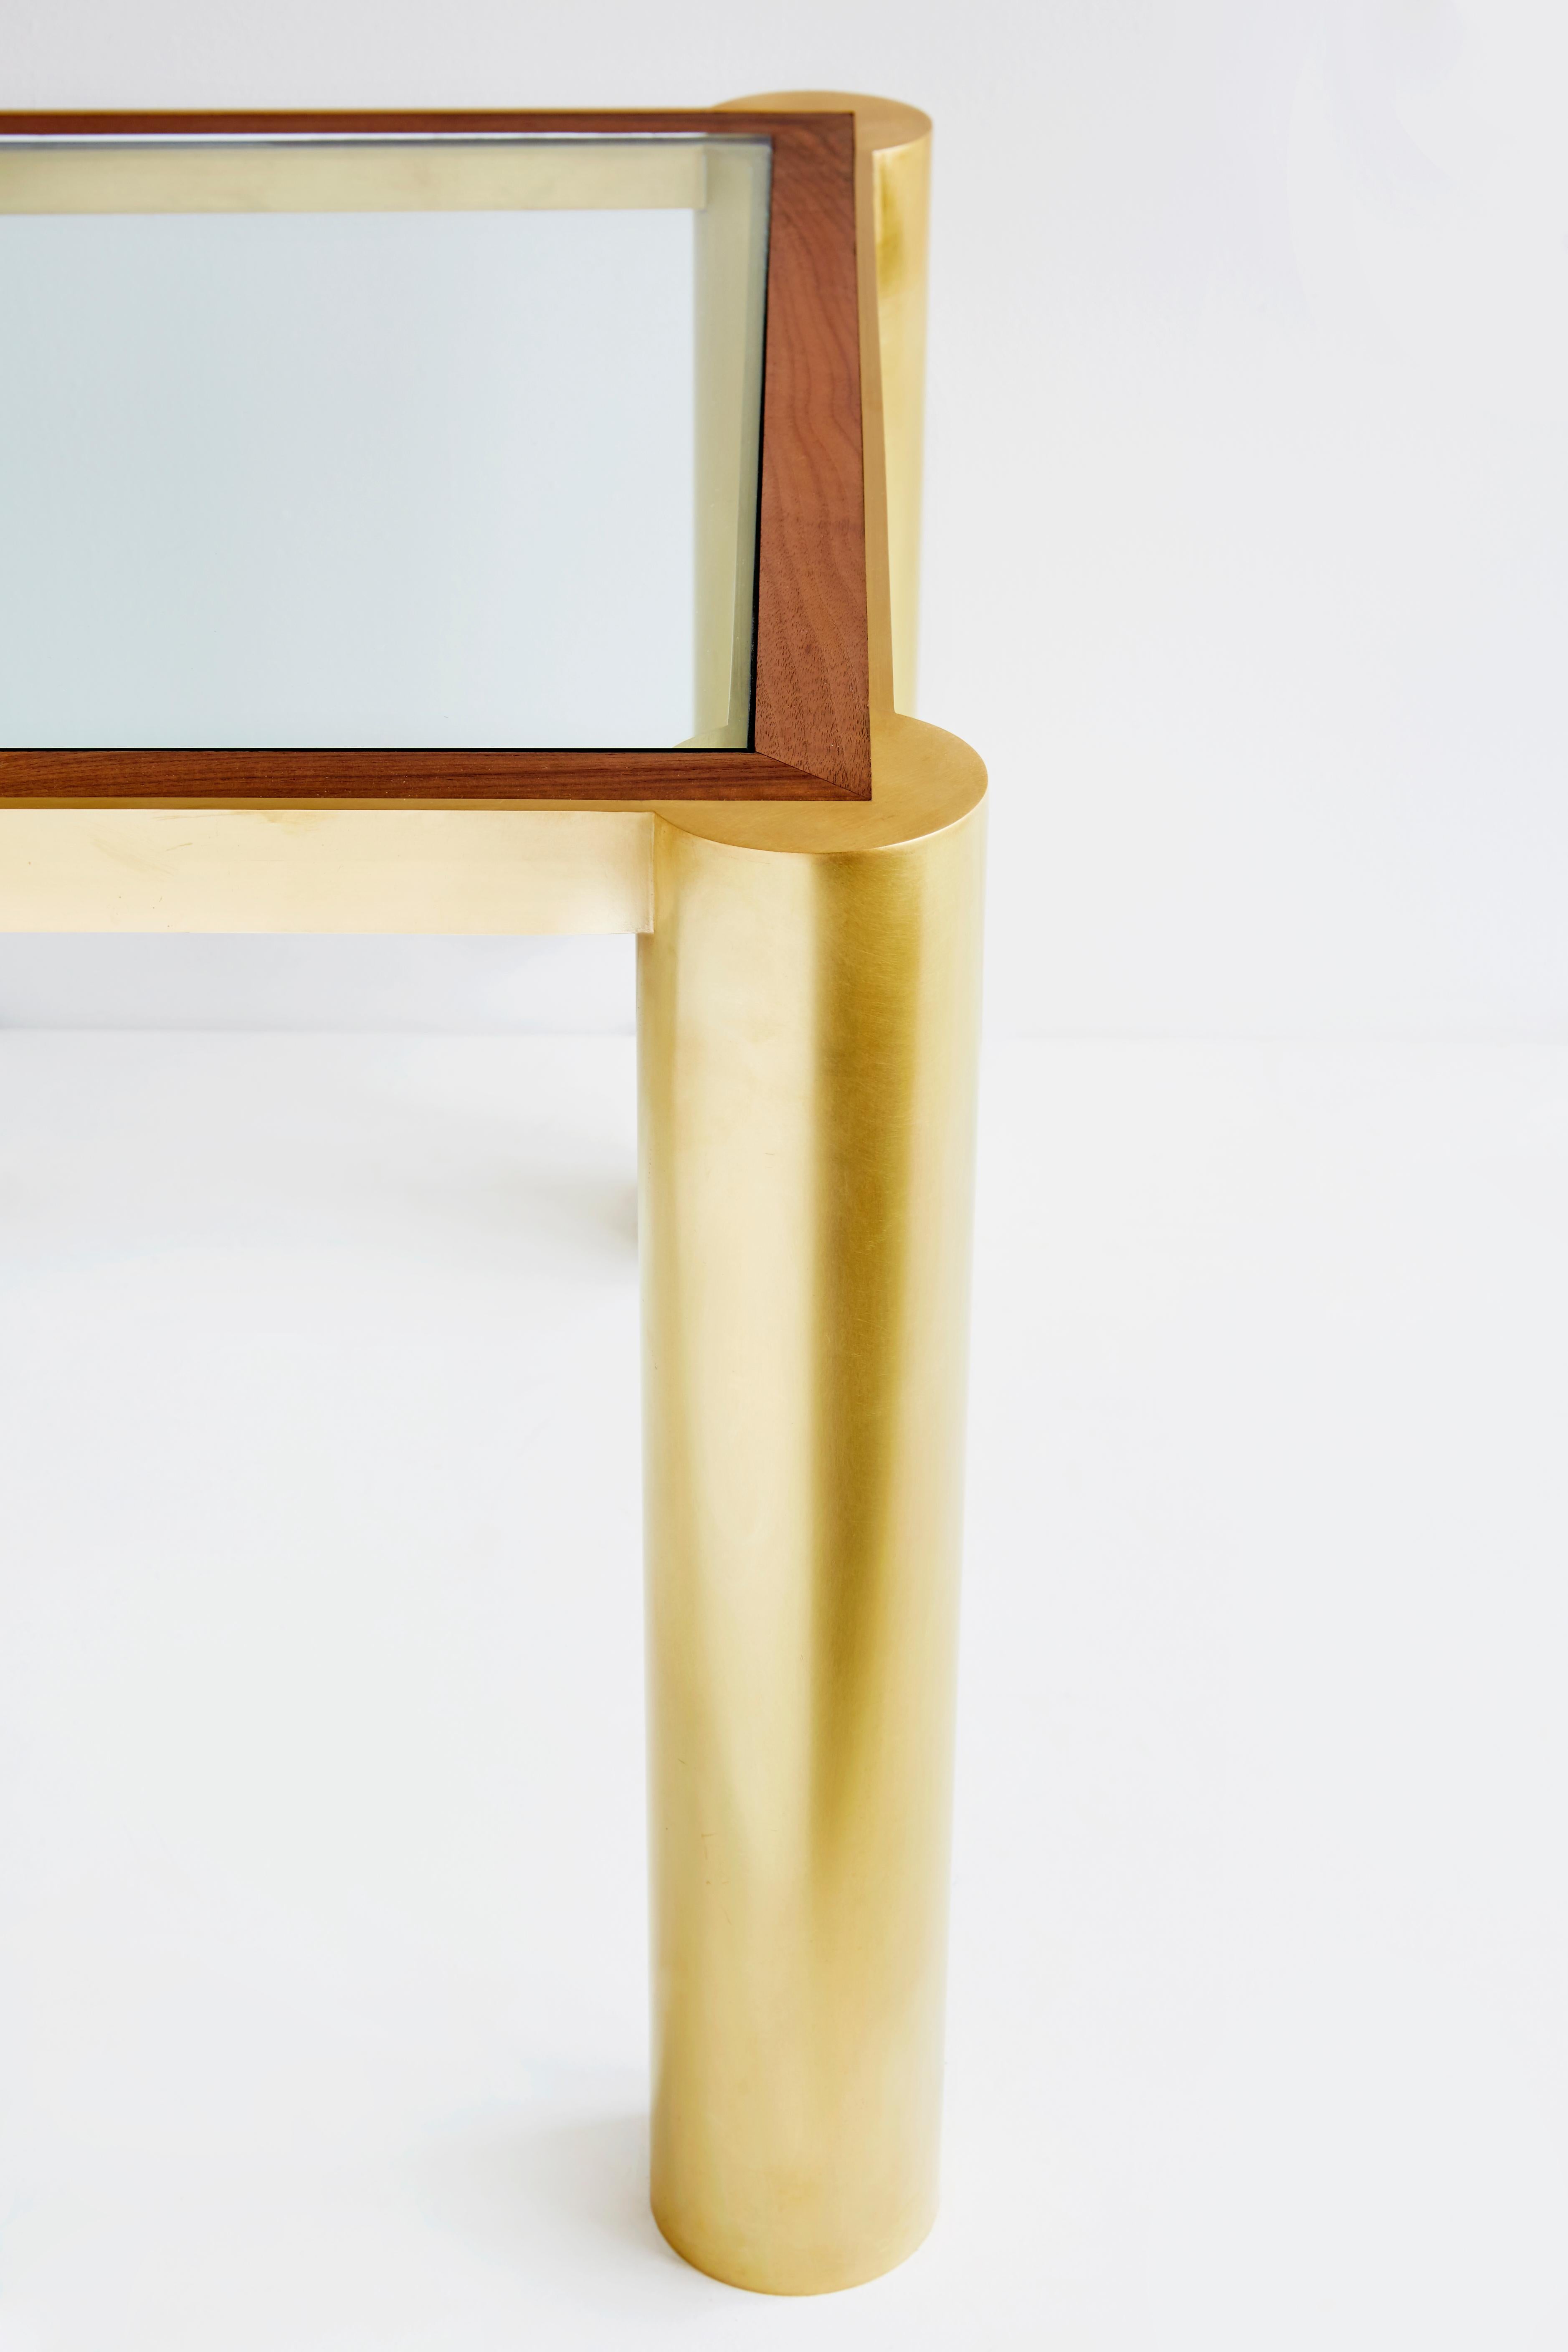 Modern Seline Table in Walnut and Brass by Cam Crockford